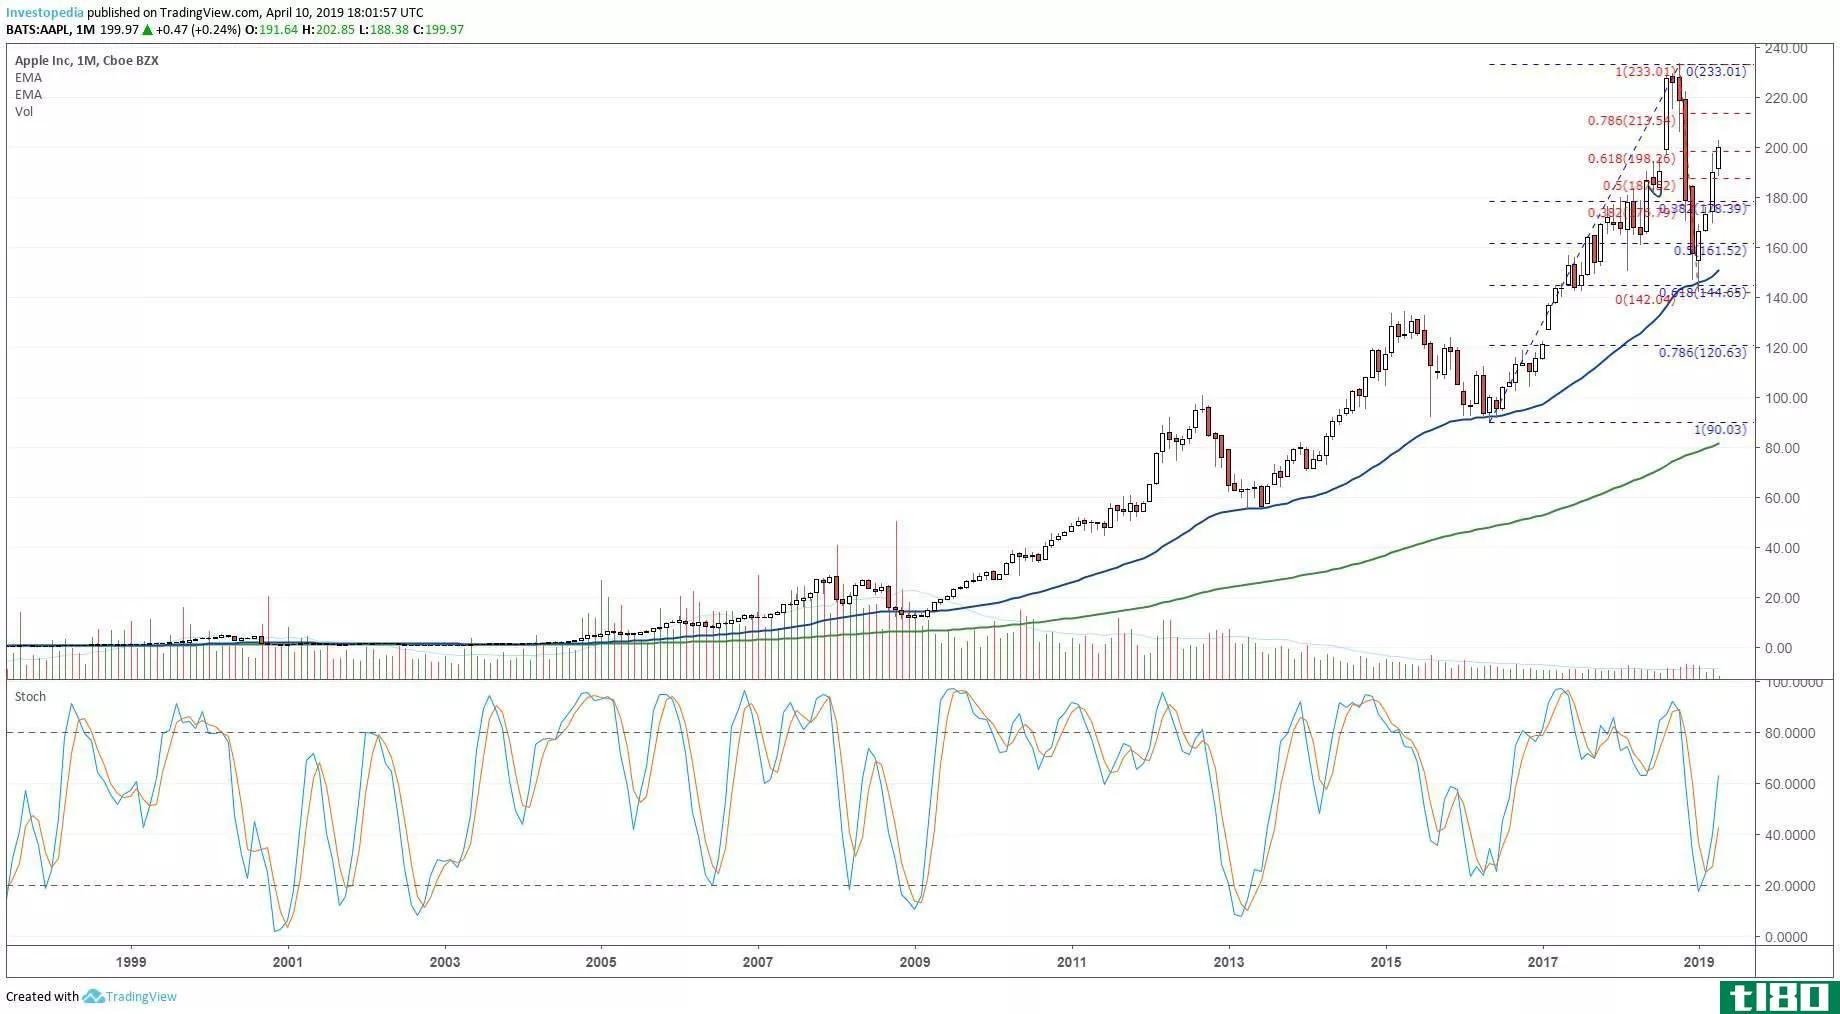 Long-term chart showing the share price performance of Apple Inc. (AAPL)